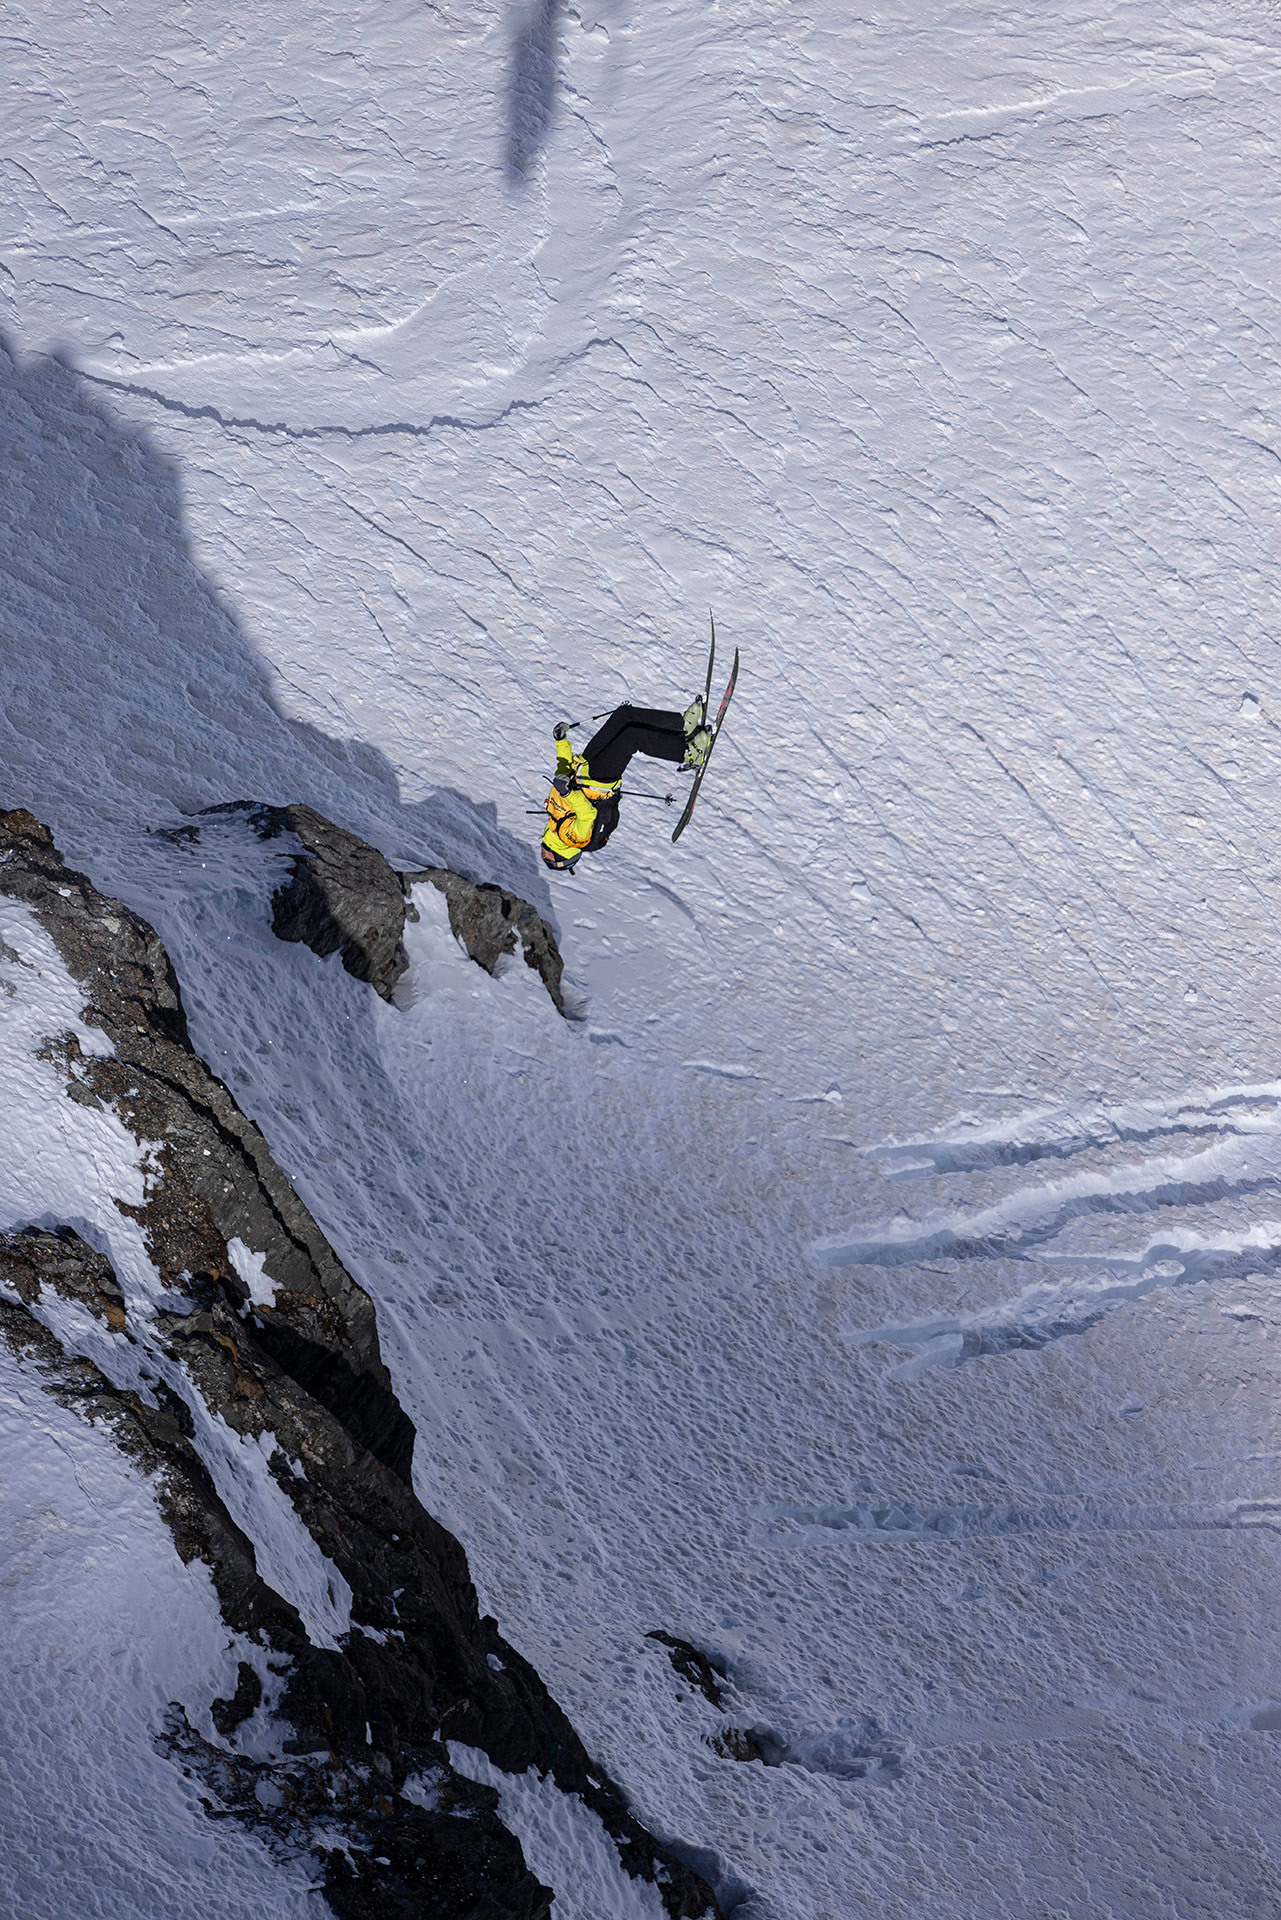 Maxime Chabloz launches a backflip at the 2022 Xtreme Verbier Freeride World Tour Finals